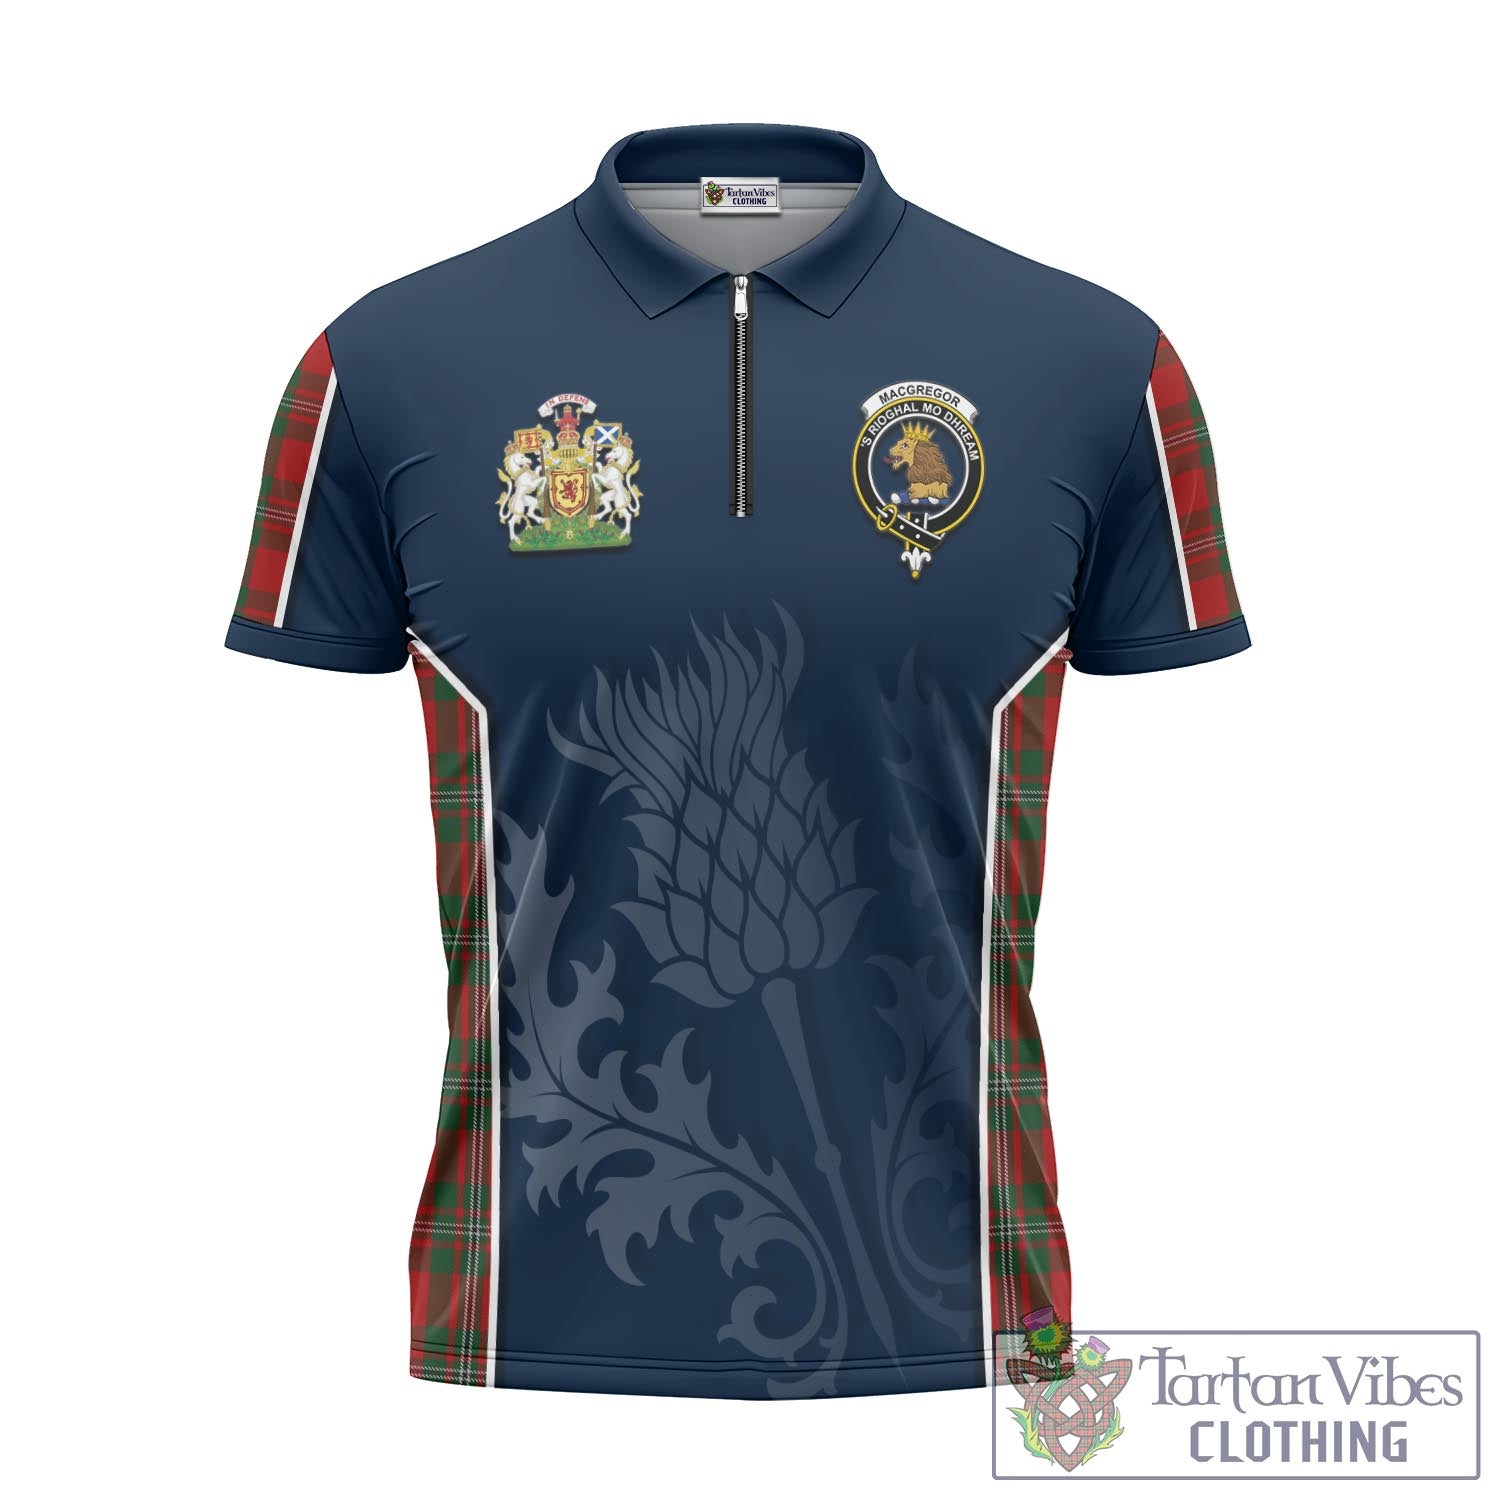 Tartan Vibes Clothing MacGregor Tartan Zipper Polo Shirt with Family Crest and Scottish Thistle Vibes Sport Style